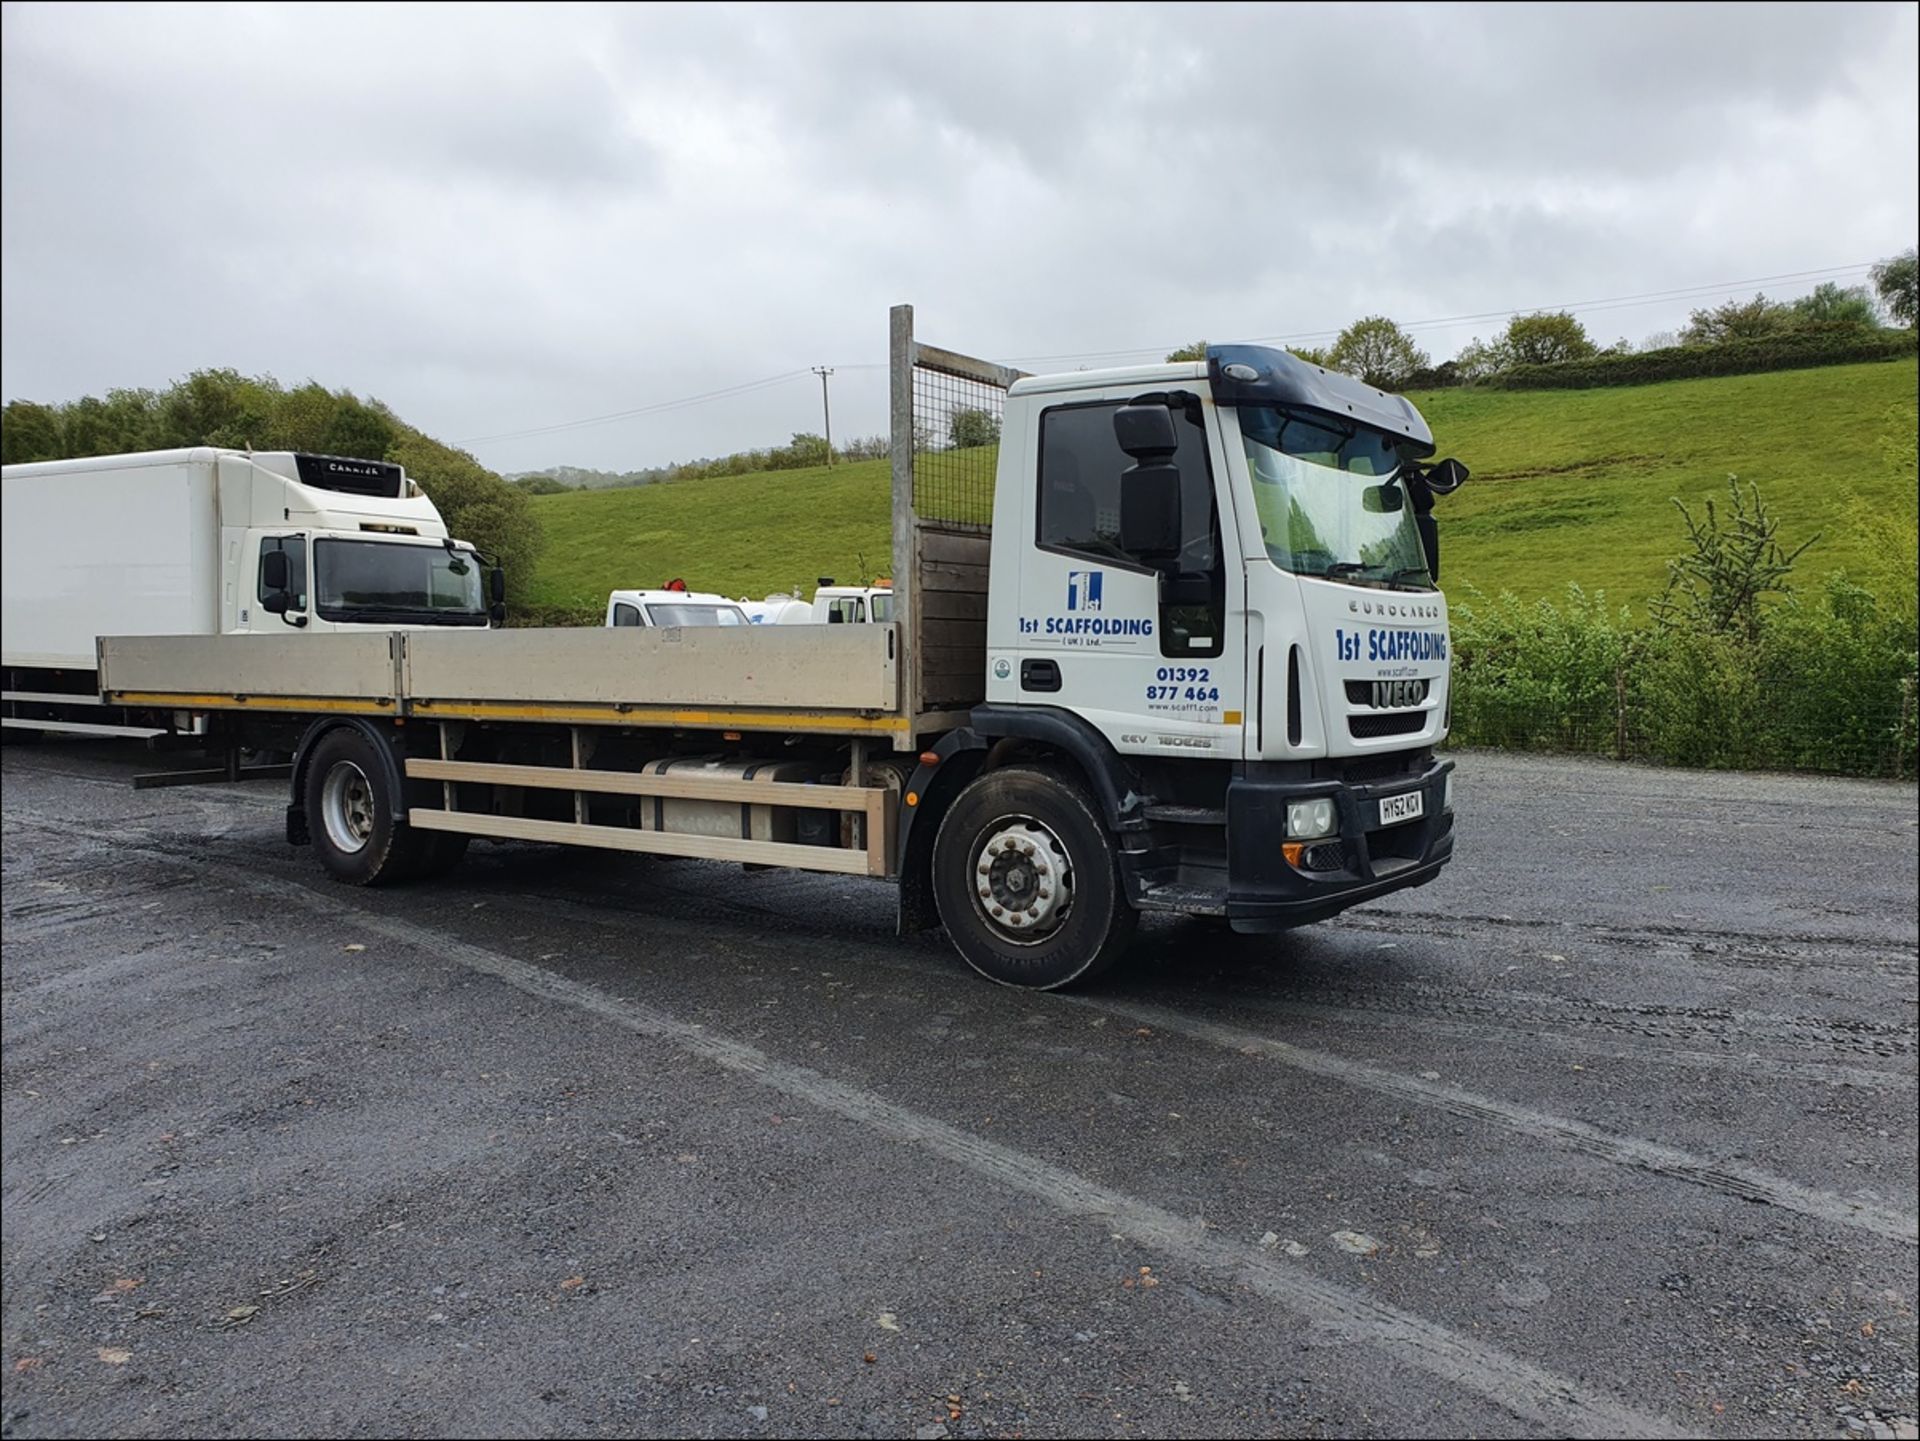 12/62 IVECO EUROCARGO (MY 2008) - 5880cc 2dr Flat Bed (White, 148k) - Image 3 of 16